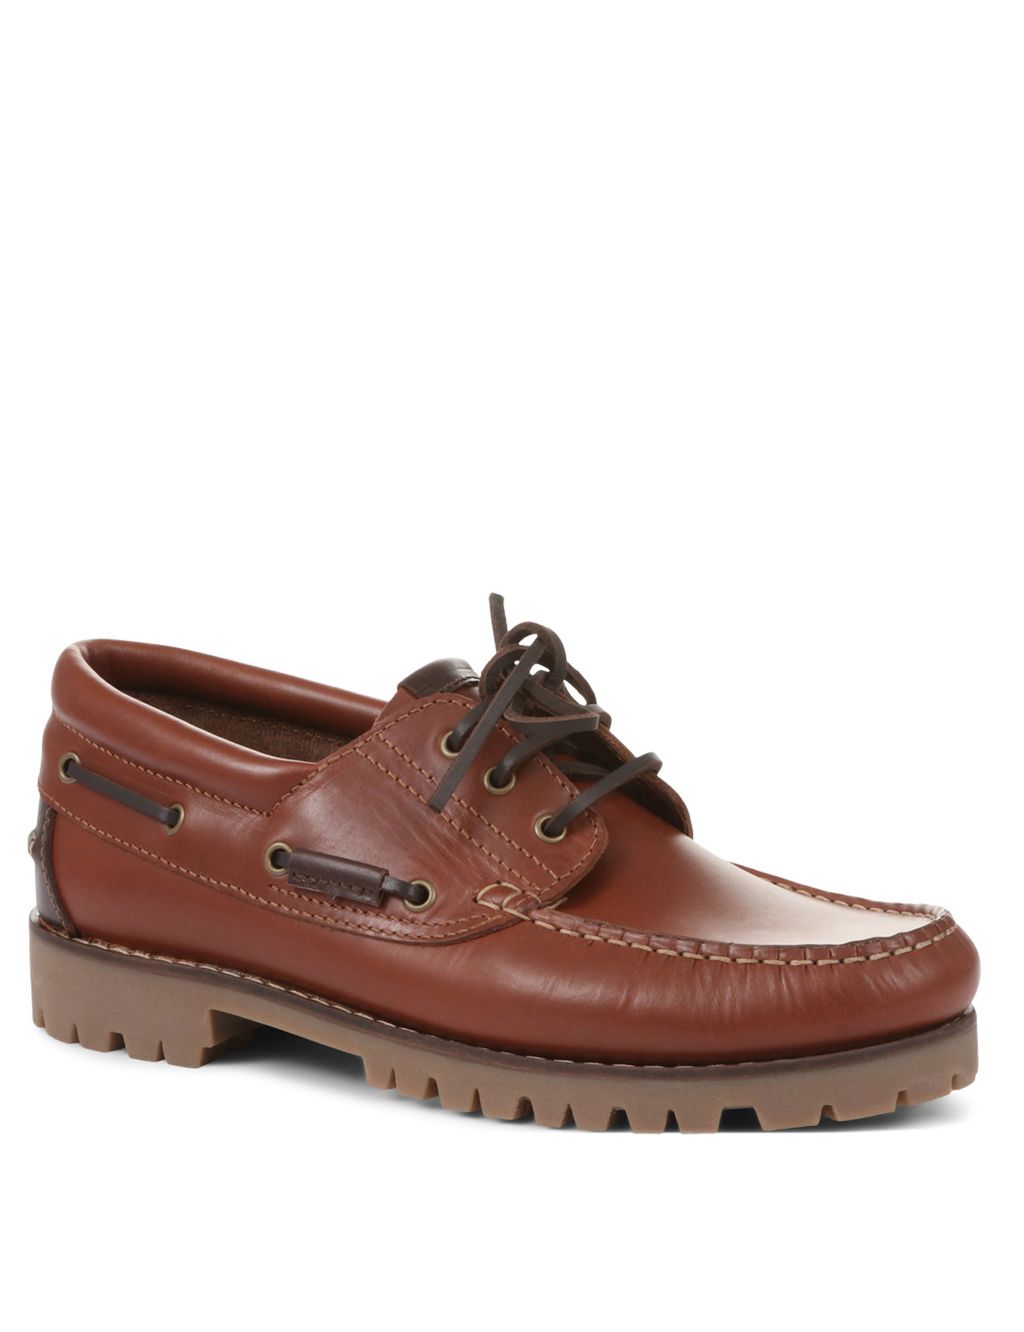 Leather Boat Shoes image 3